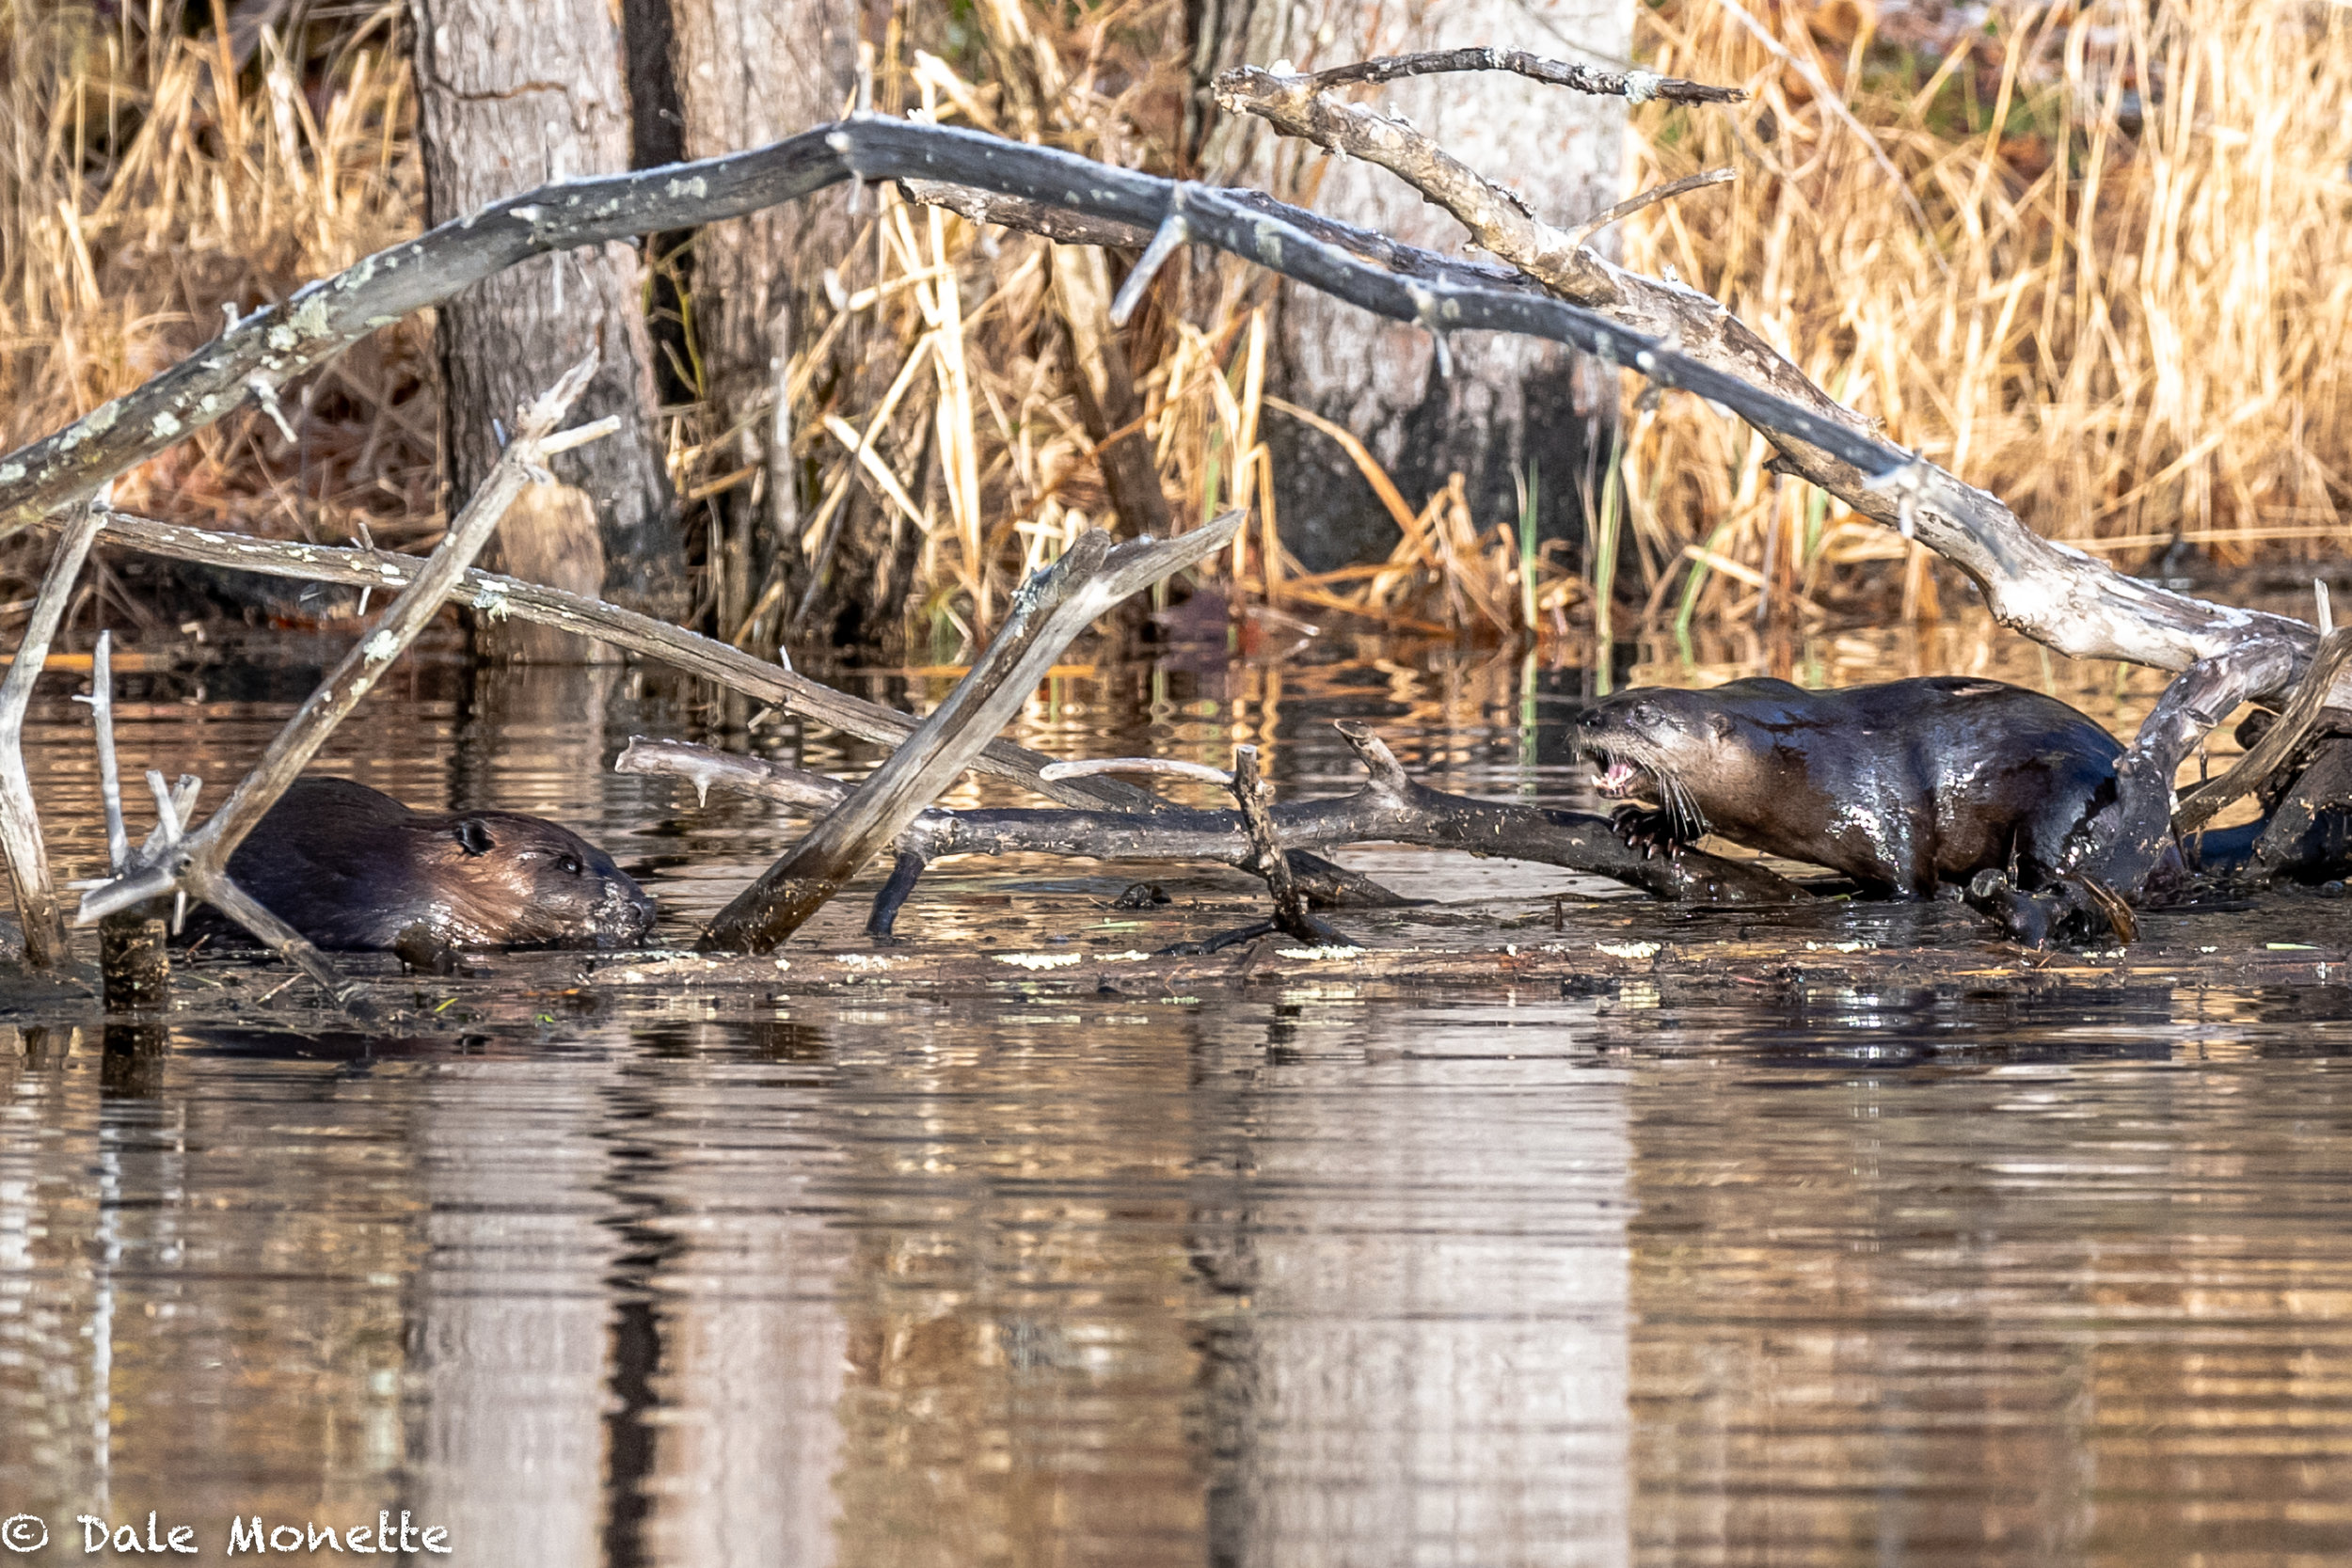   An otter and a beaver both popped up in the same space this morning.  After a few screams from the otter, the beaver headed home after a long nights work…..  